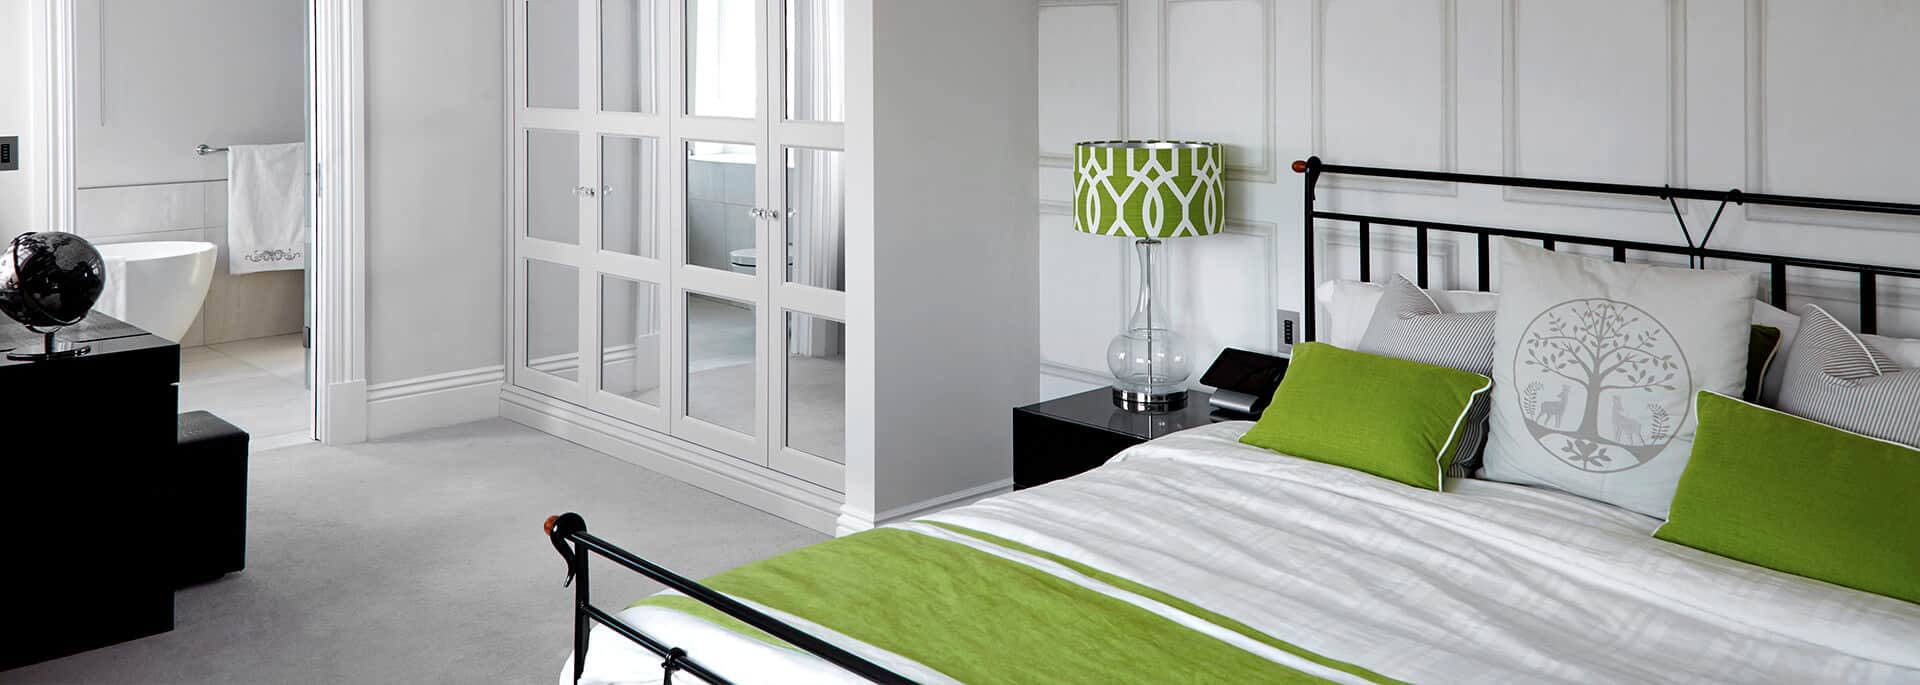 Green and white bedroom design with fitted wardrobes